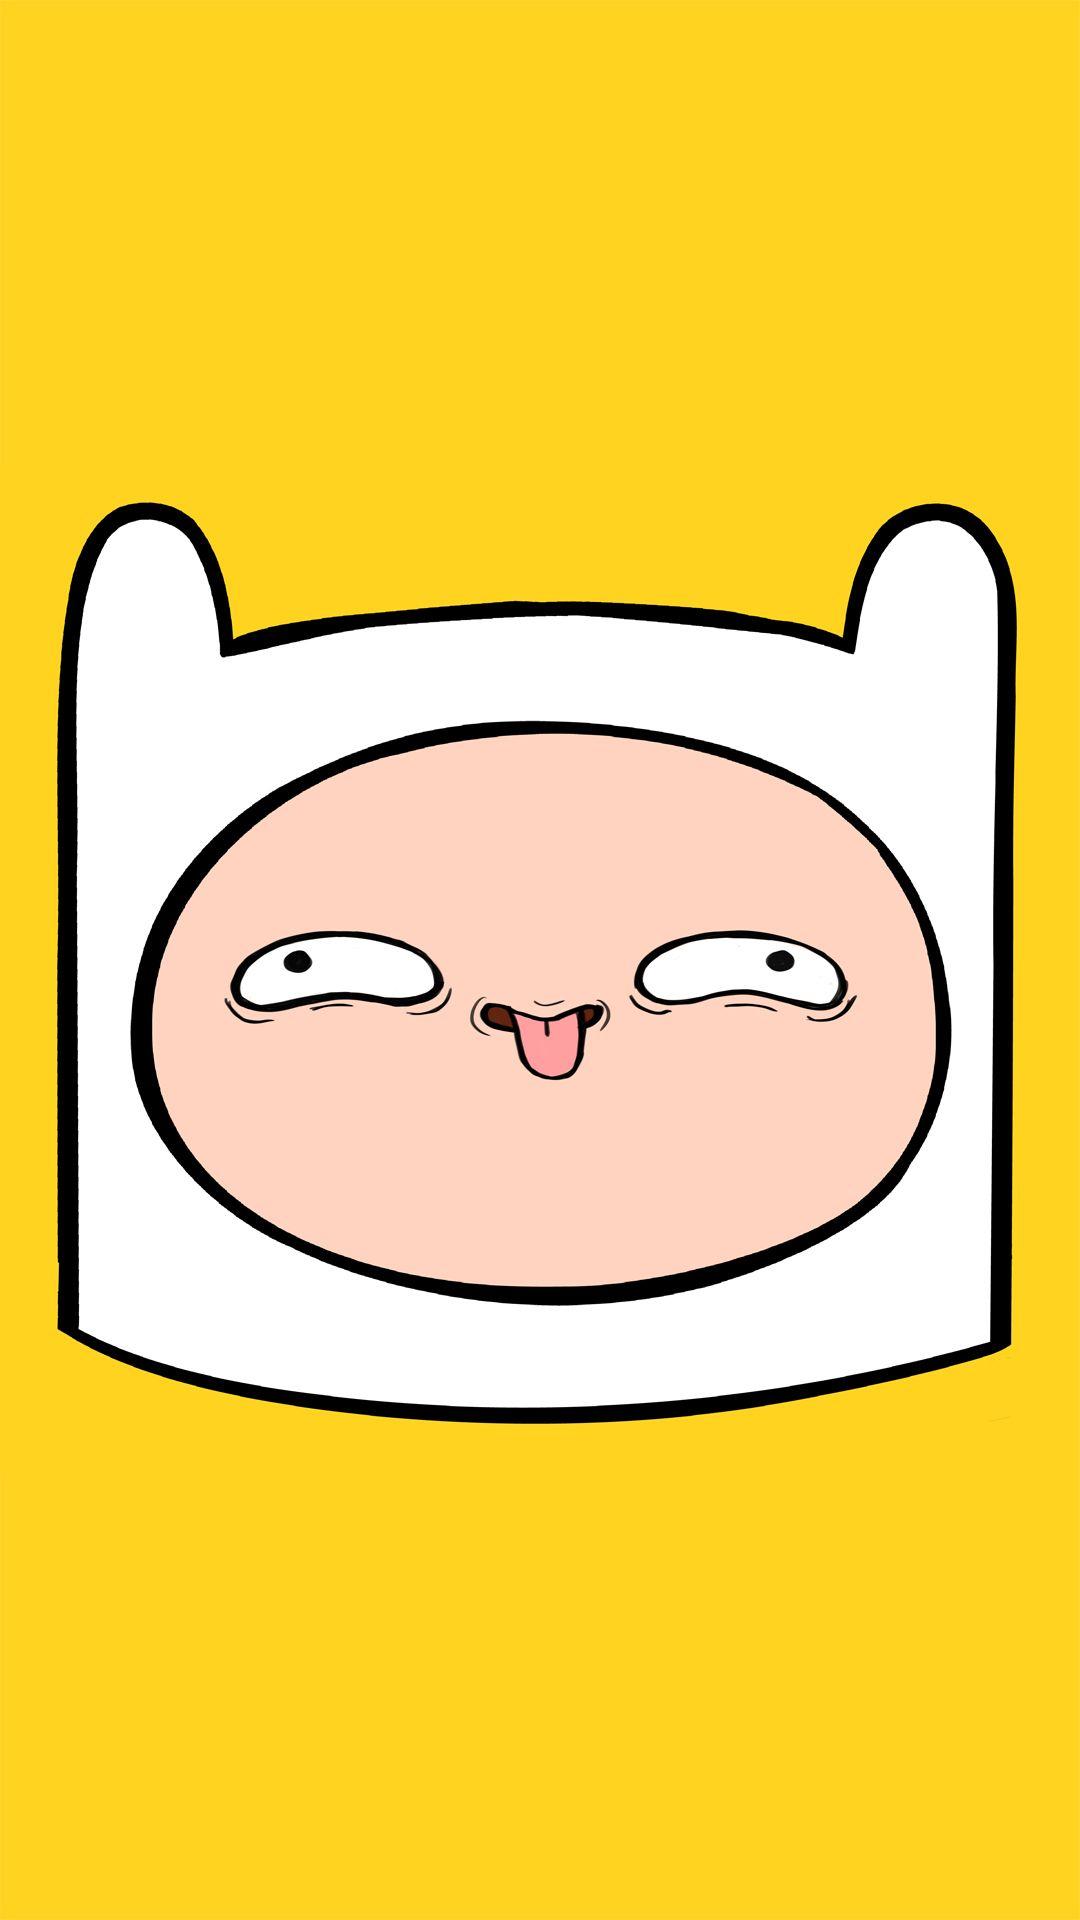 Wallpaper.wiki 1080x1920 Adventure Time IPhone Background PIC